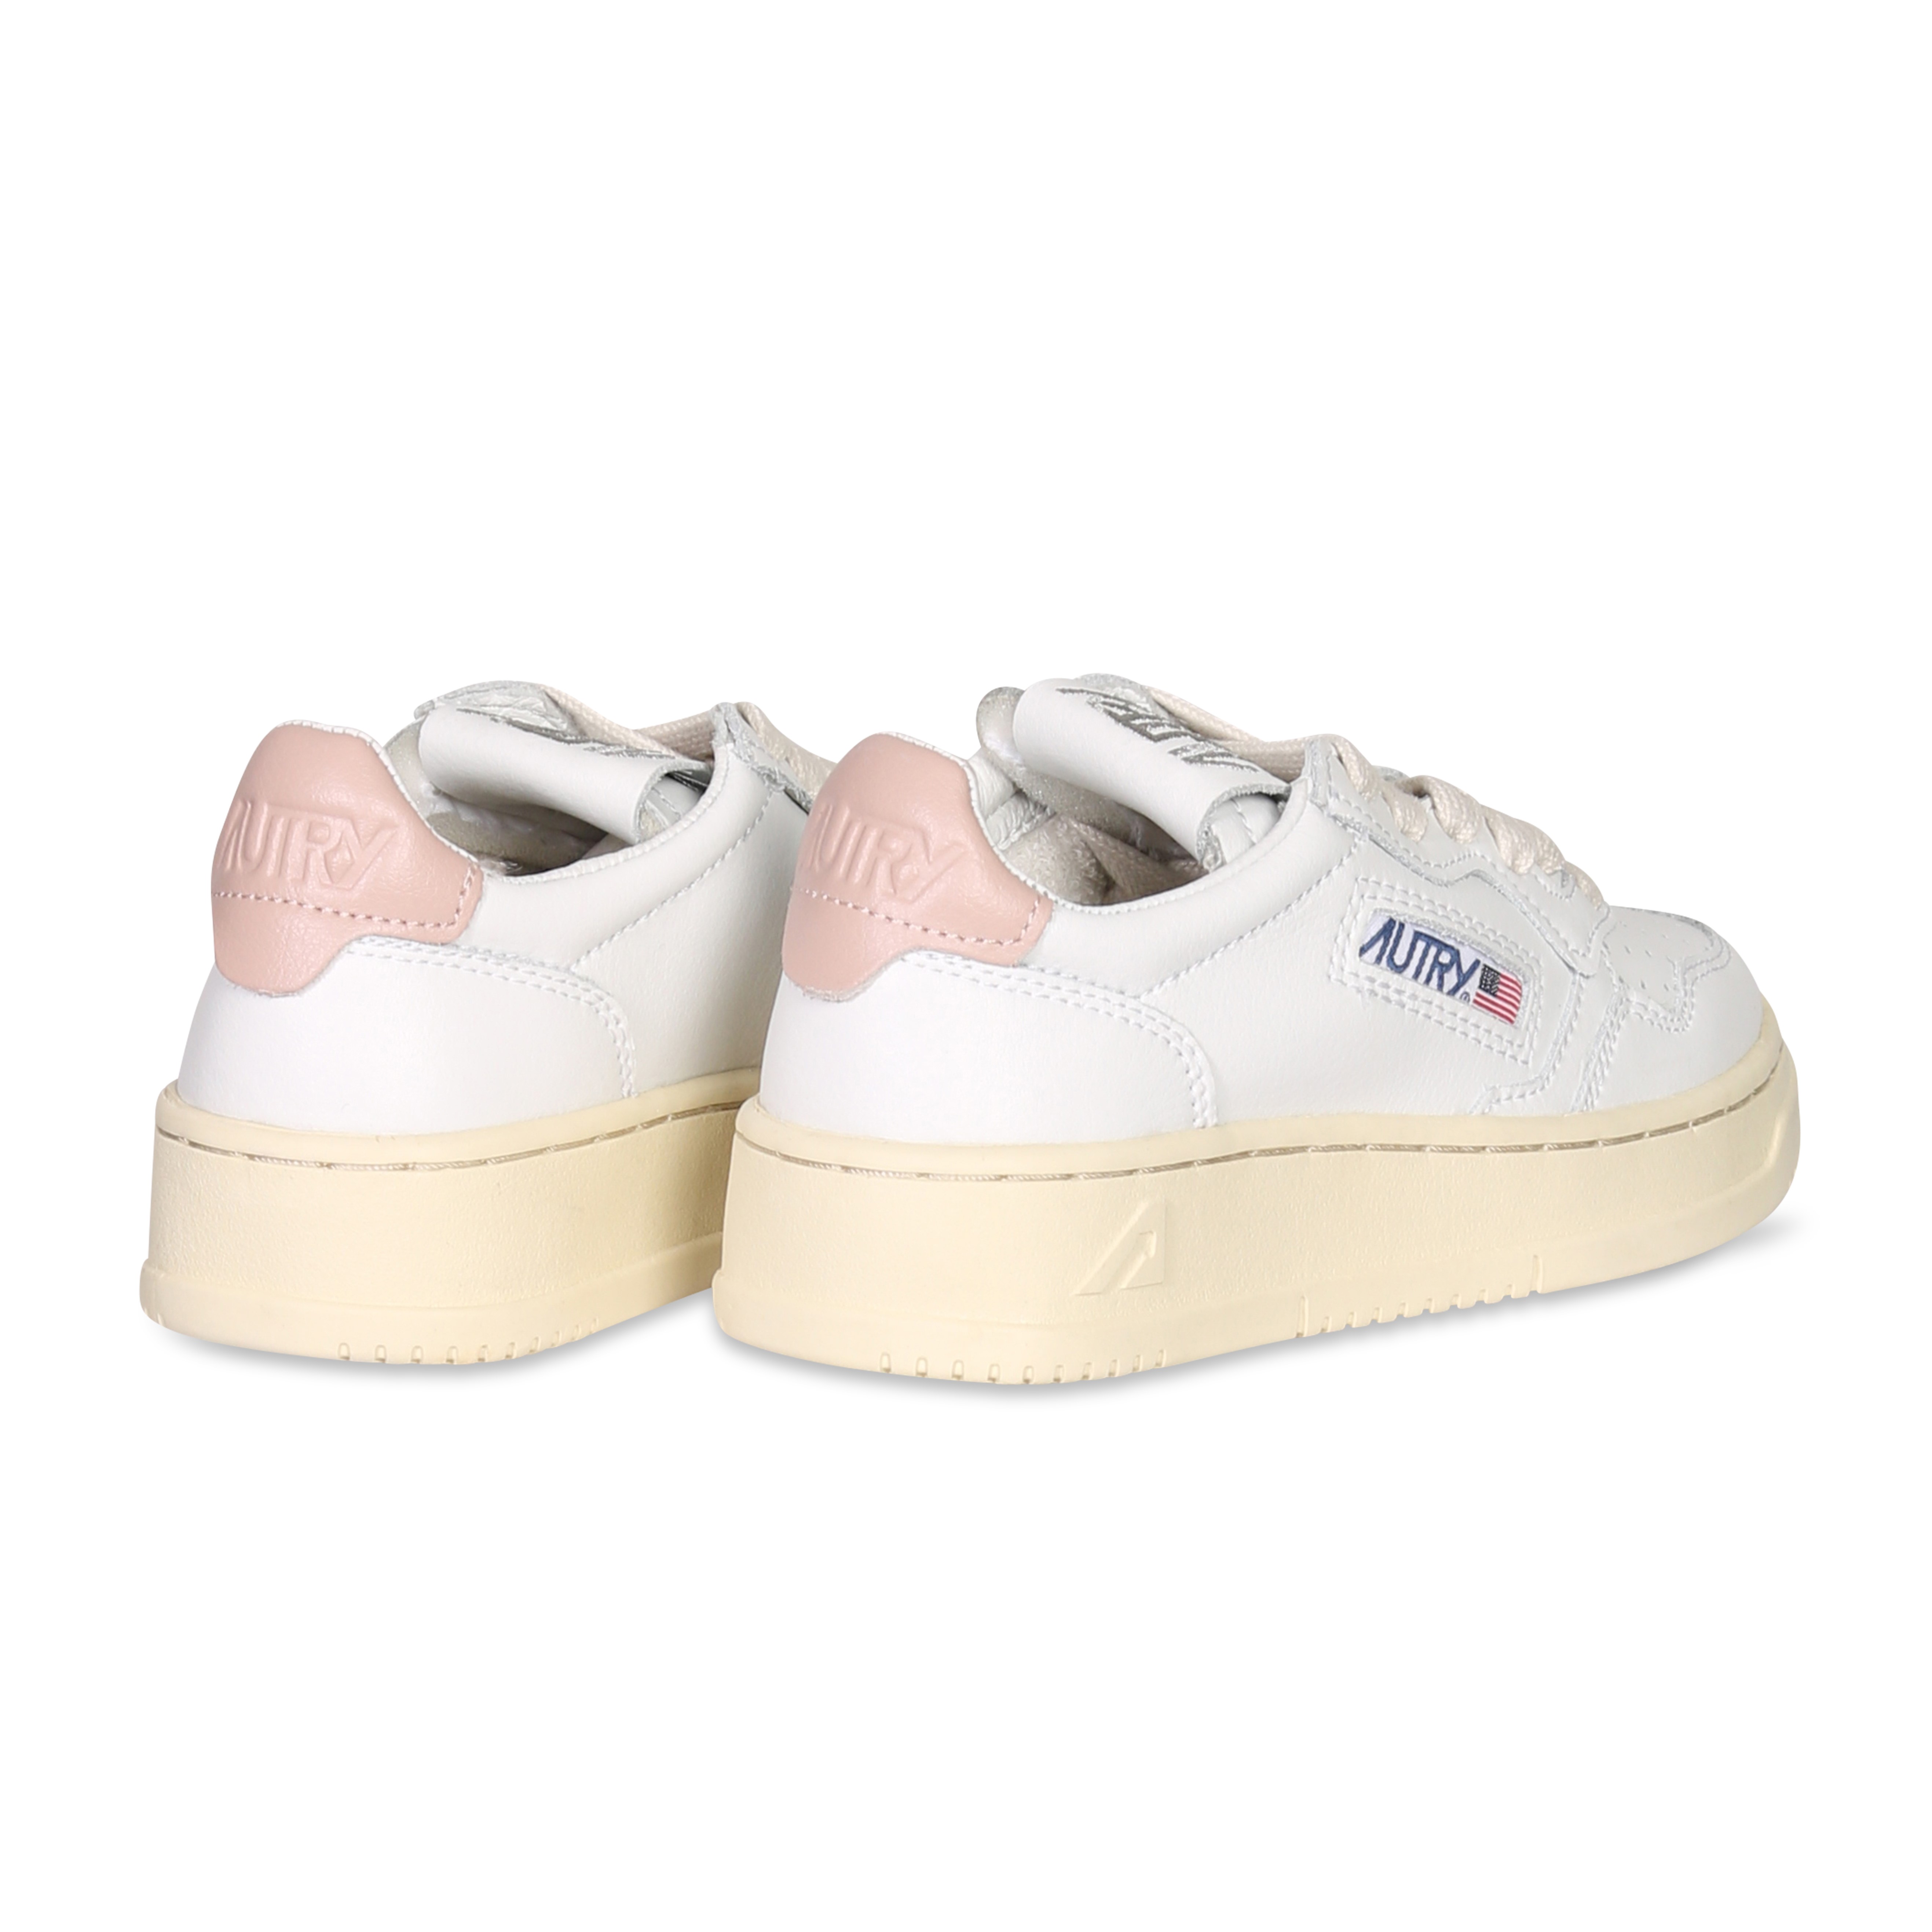 -Kids- Autry Action Shoes Low Sneaker in White/Pink 26